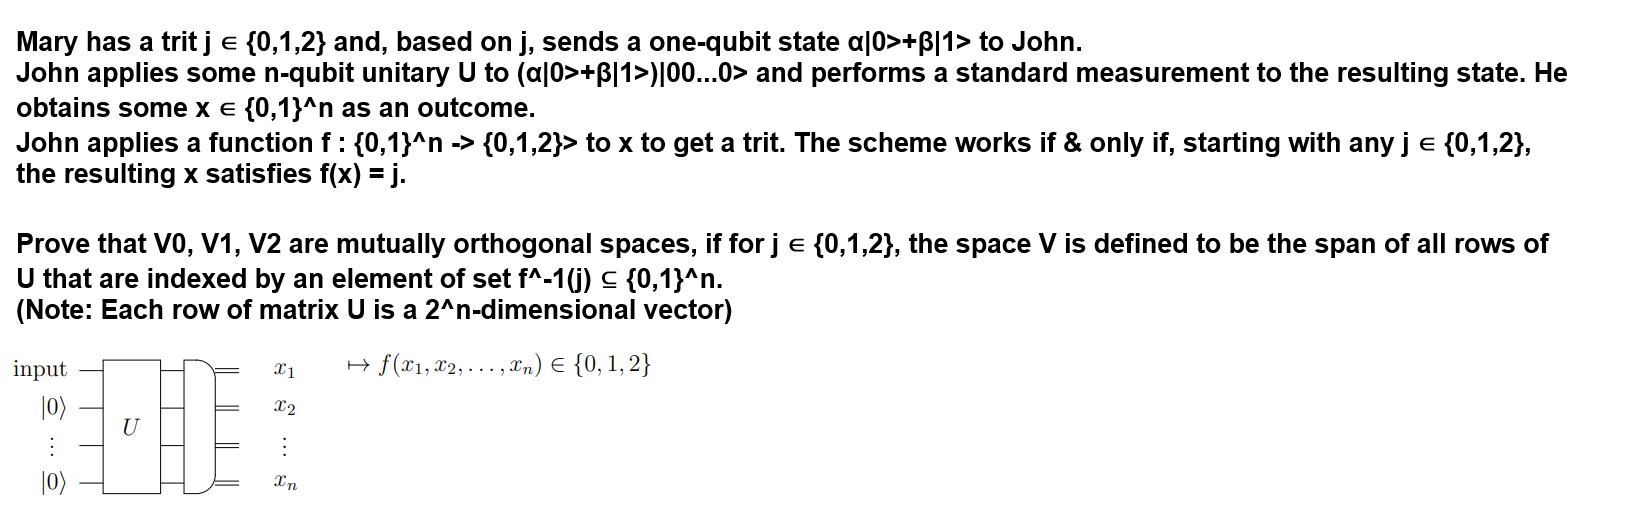 Mary has a trit j = {0,1,2} and, based on j, sends a one-qubit state a|0>+B|1> to John. John applies some